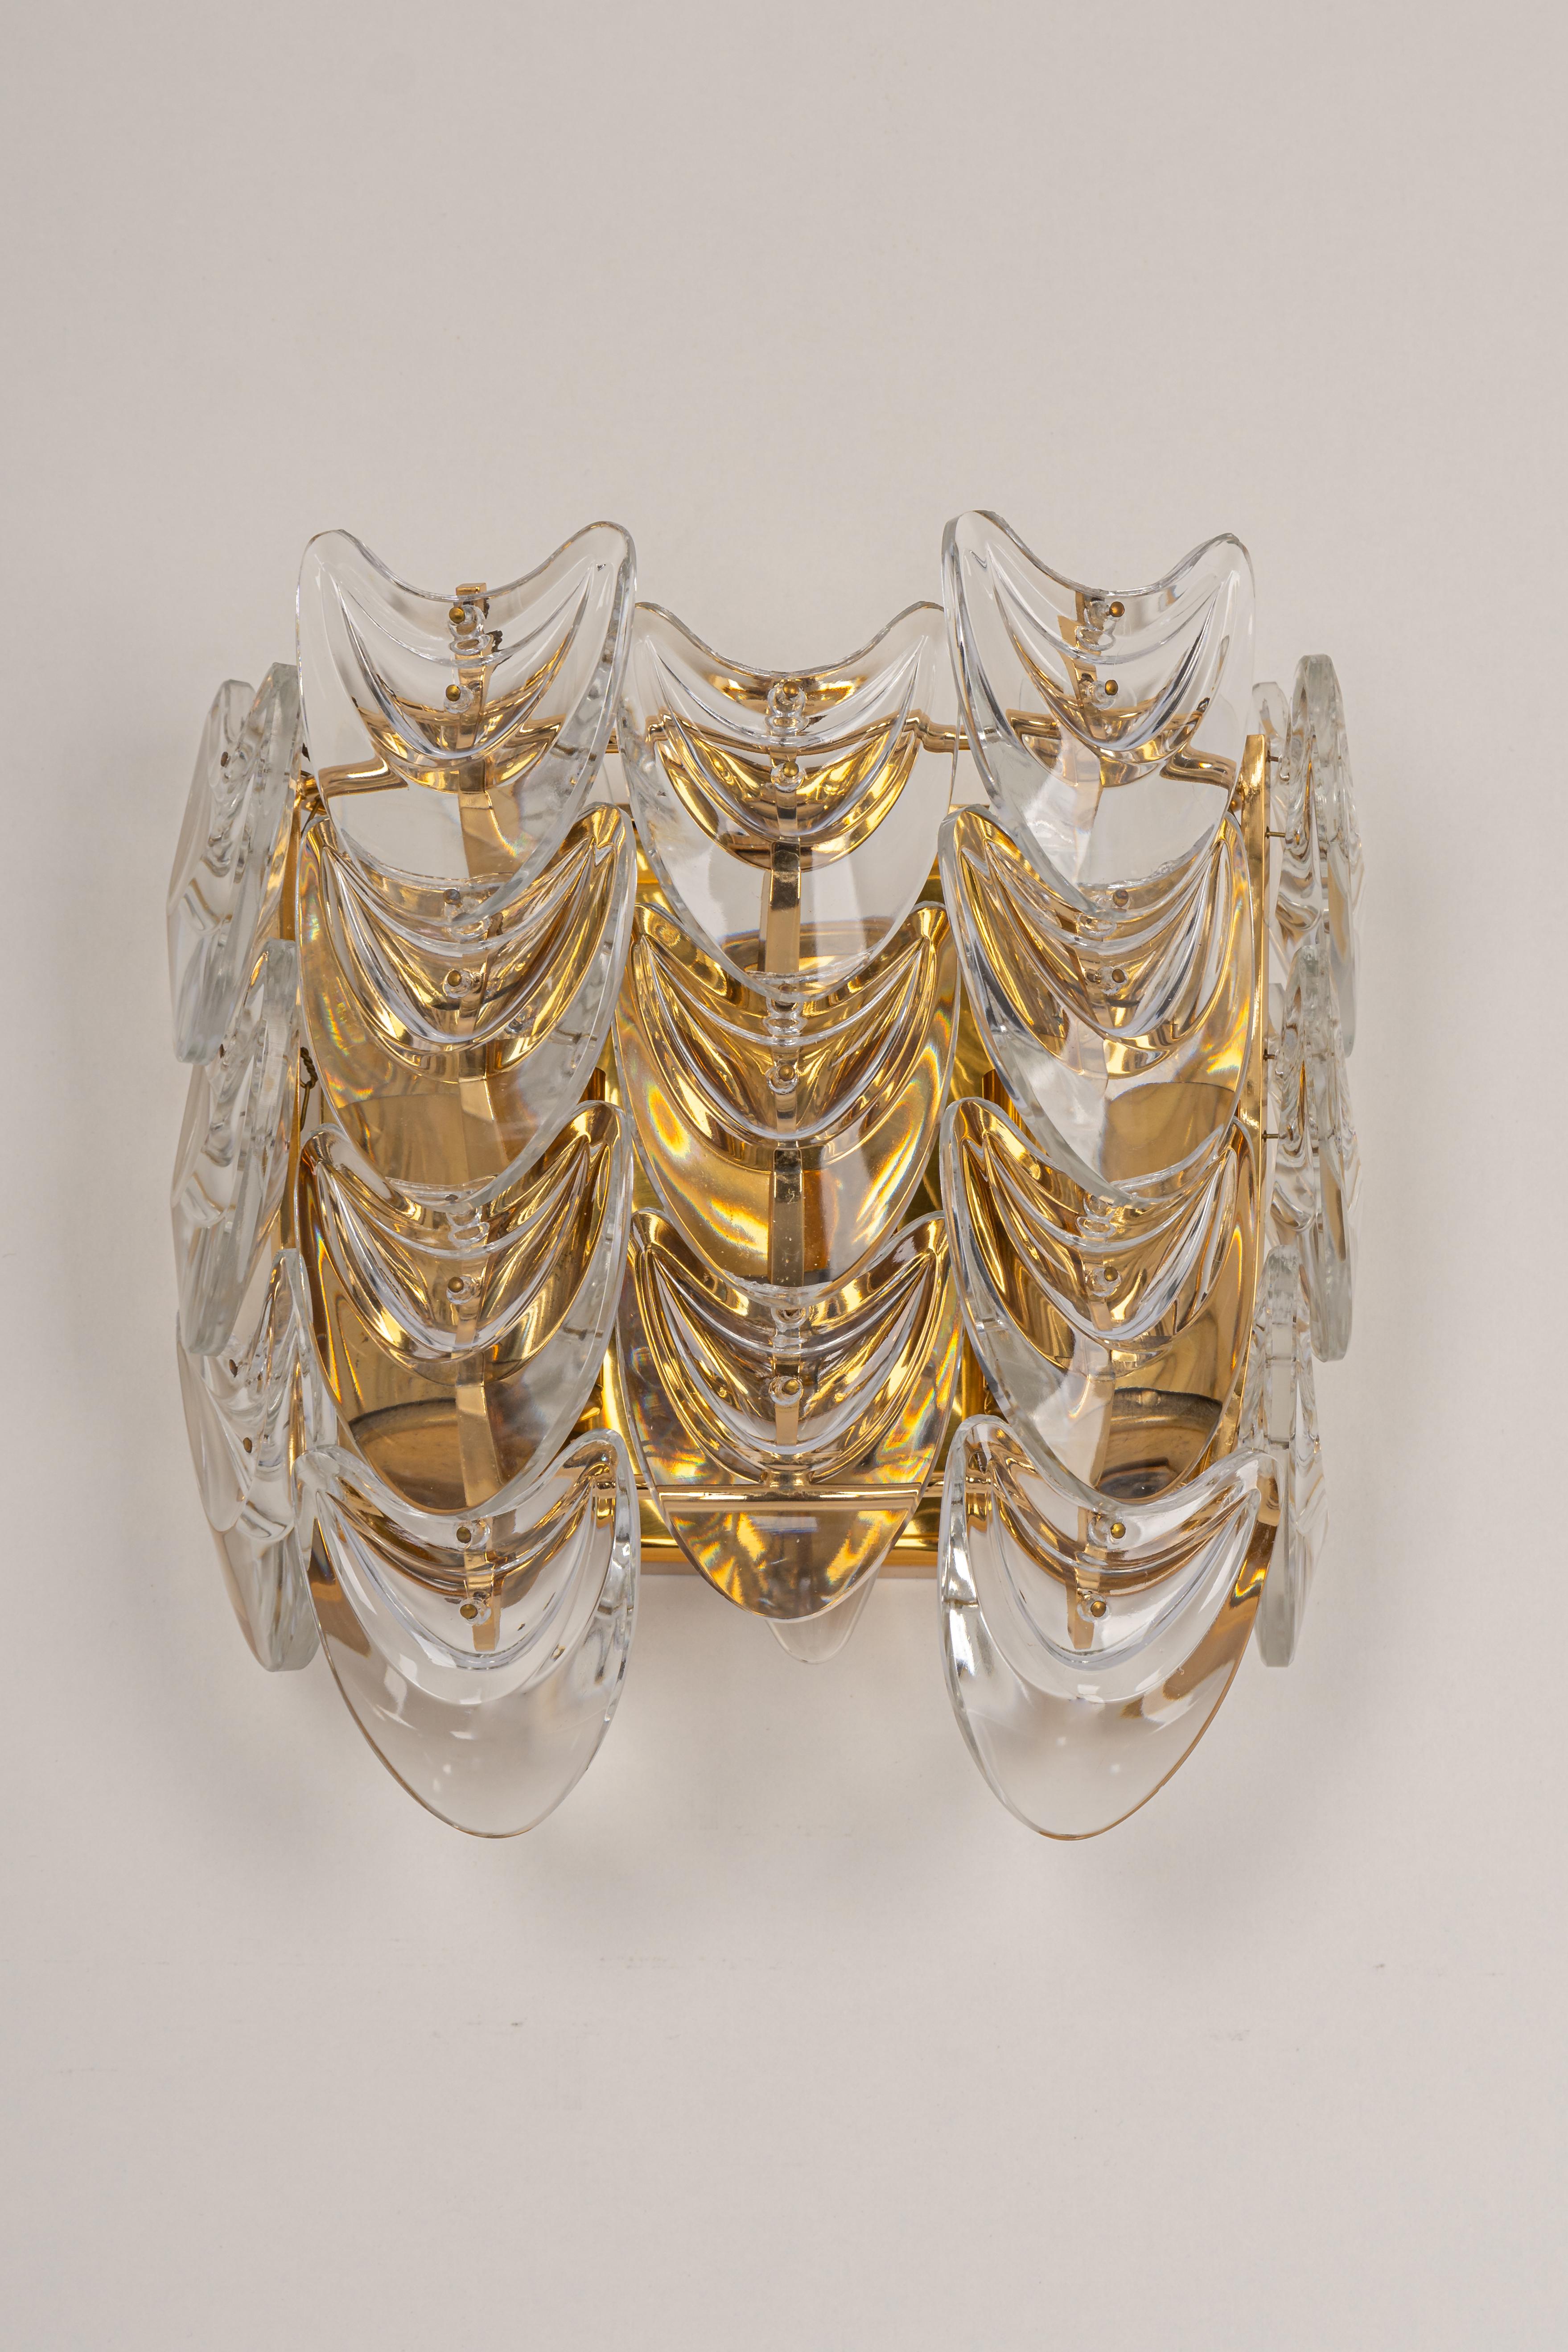 Mid-Century Modern Pair of Gilded Brass Crystal Wall Lights, Sciolari Design, Palwa, Germany, 1960s For Sale